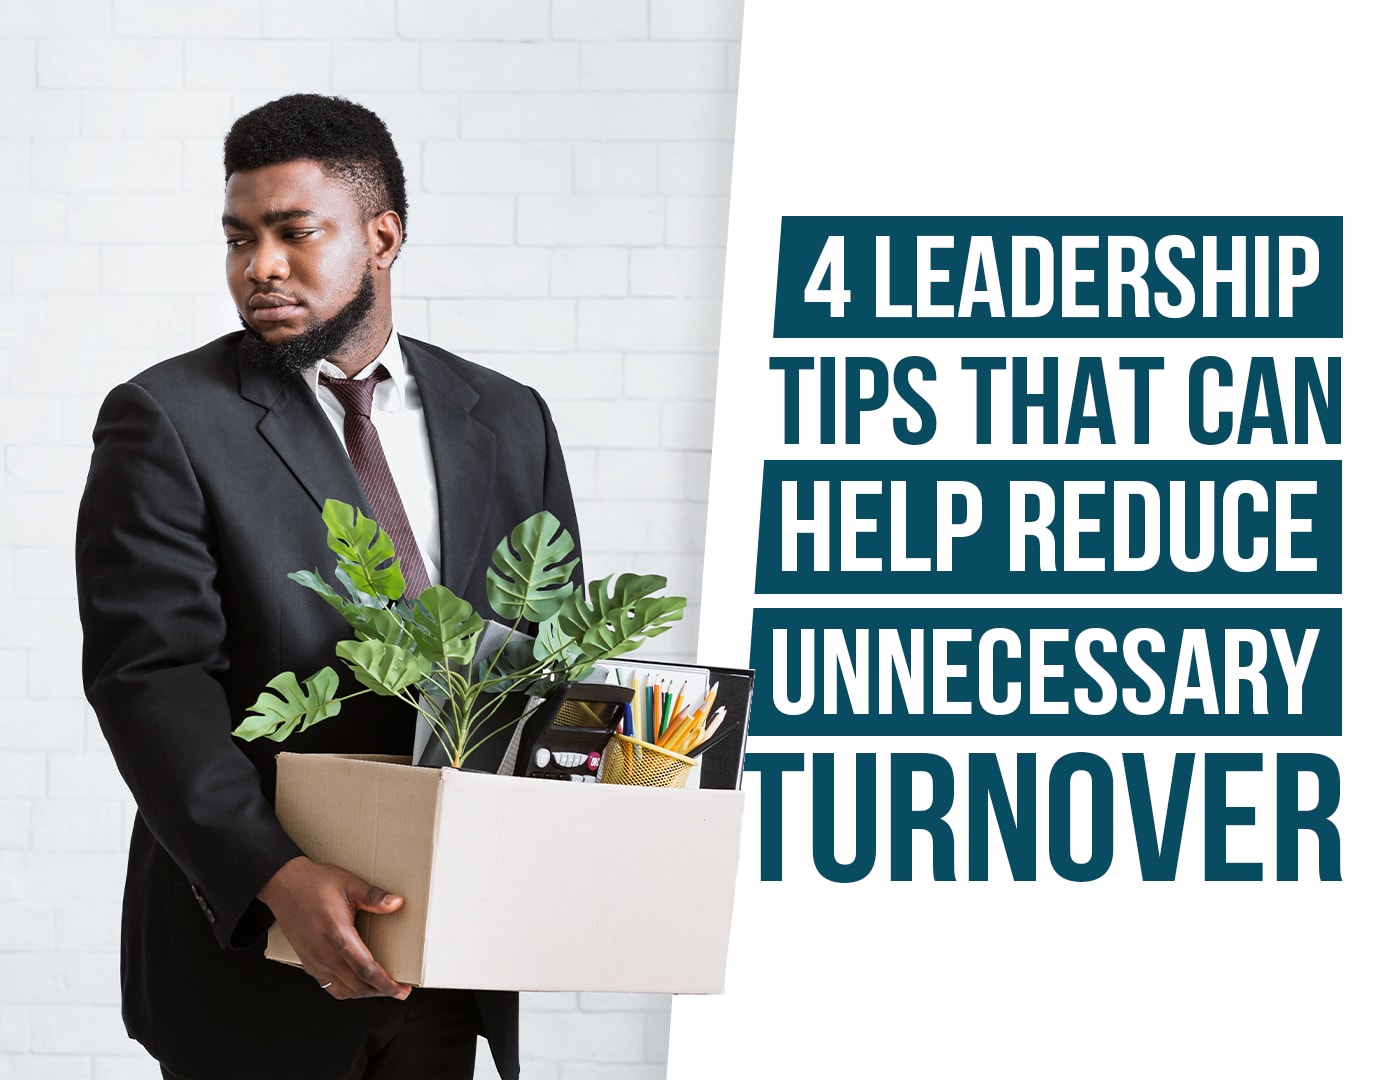 4 Leadership Tips that can Help Reduce Unnecessary Turnover